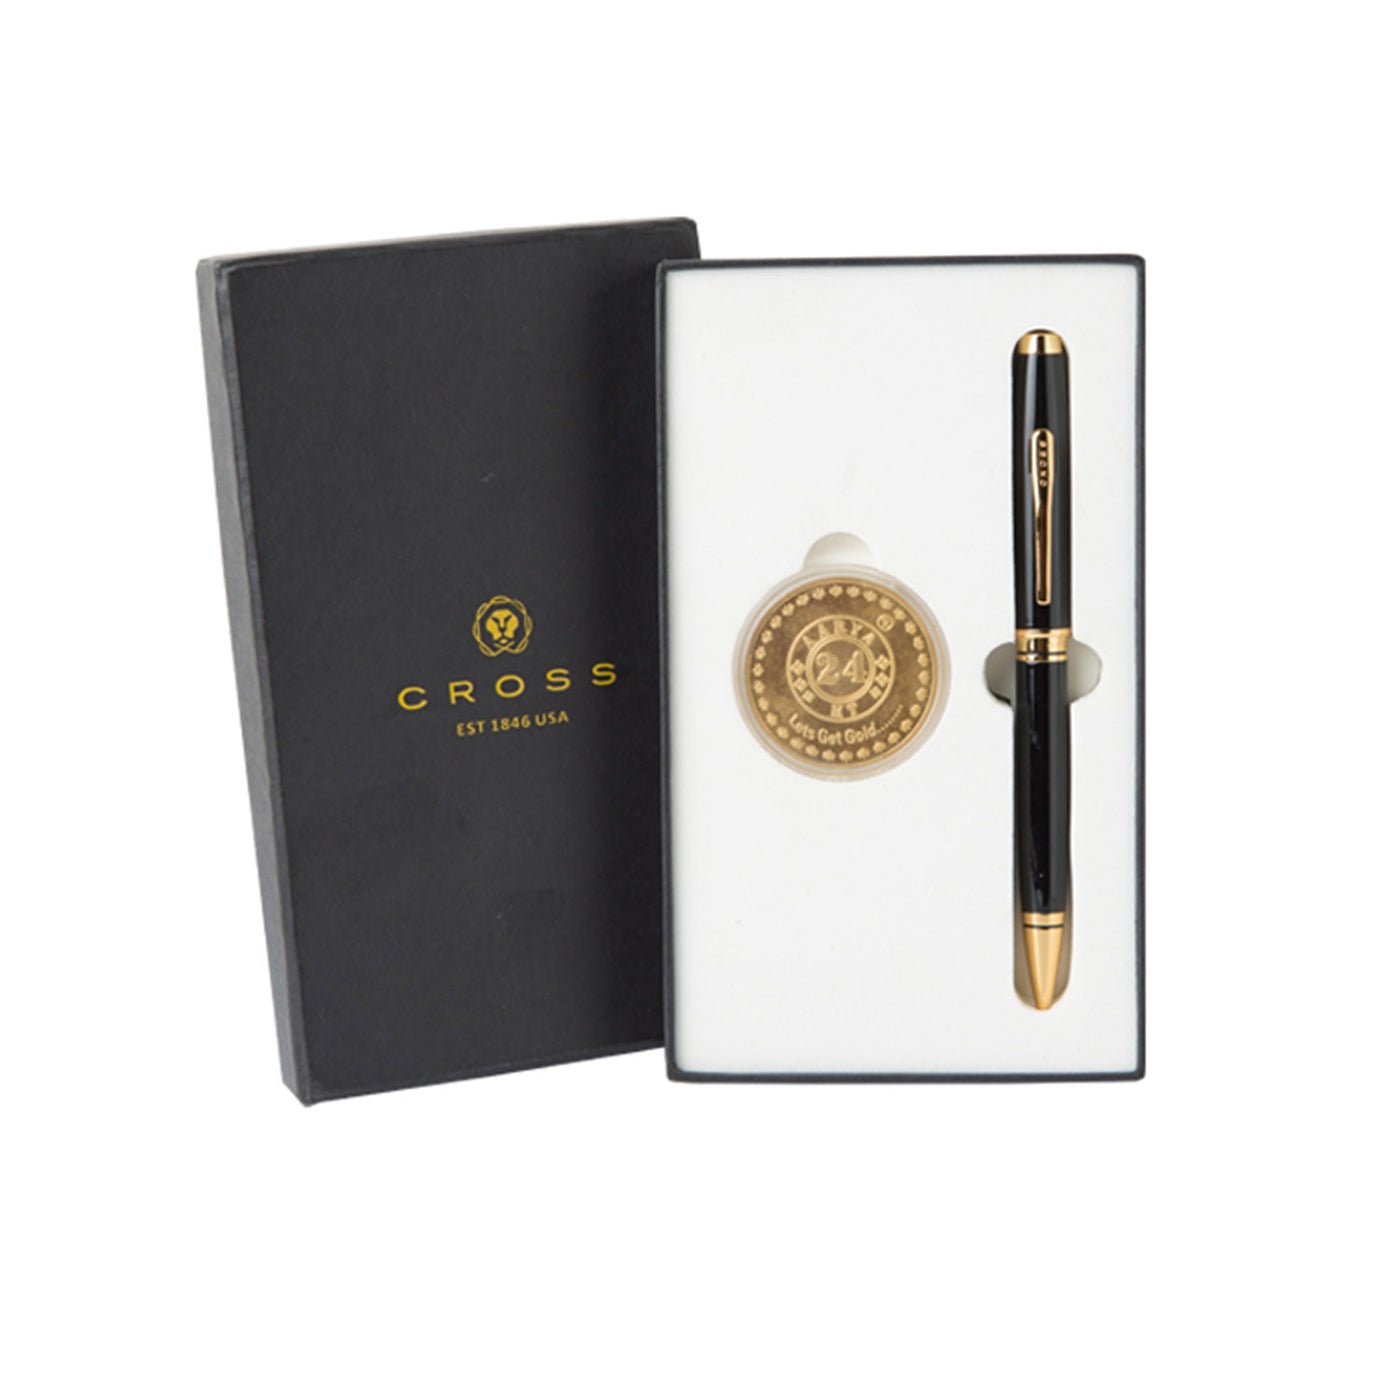 Cross Coventry Black Ball Pen Combo Gift Set, Black With Gold Coin 1